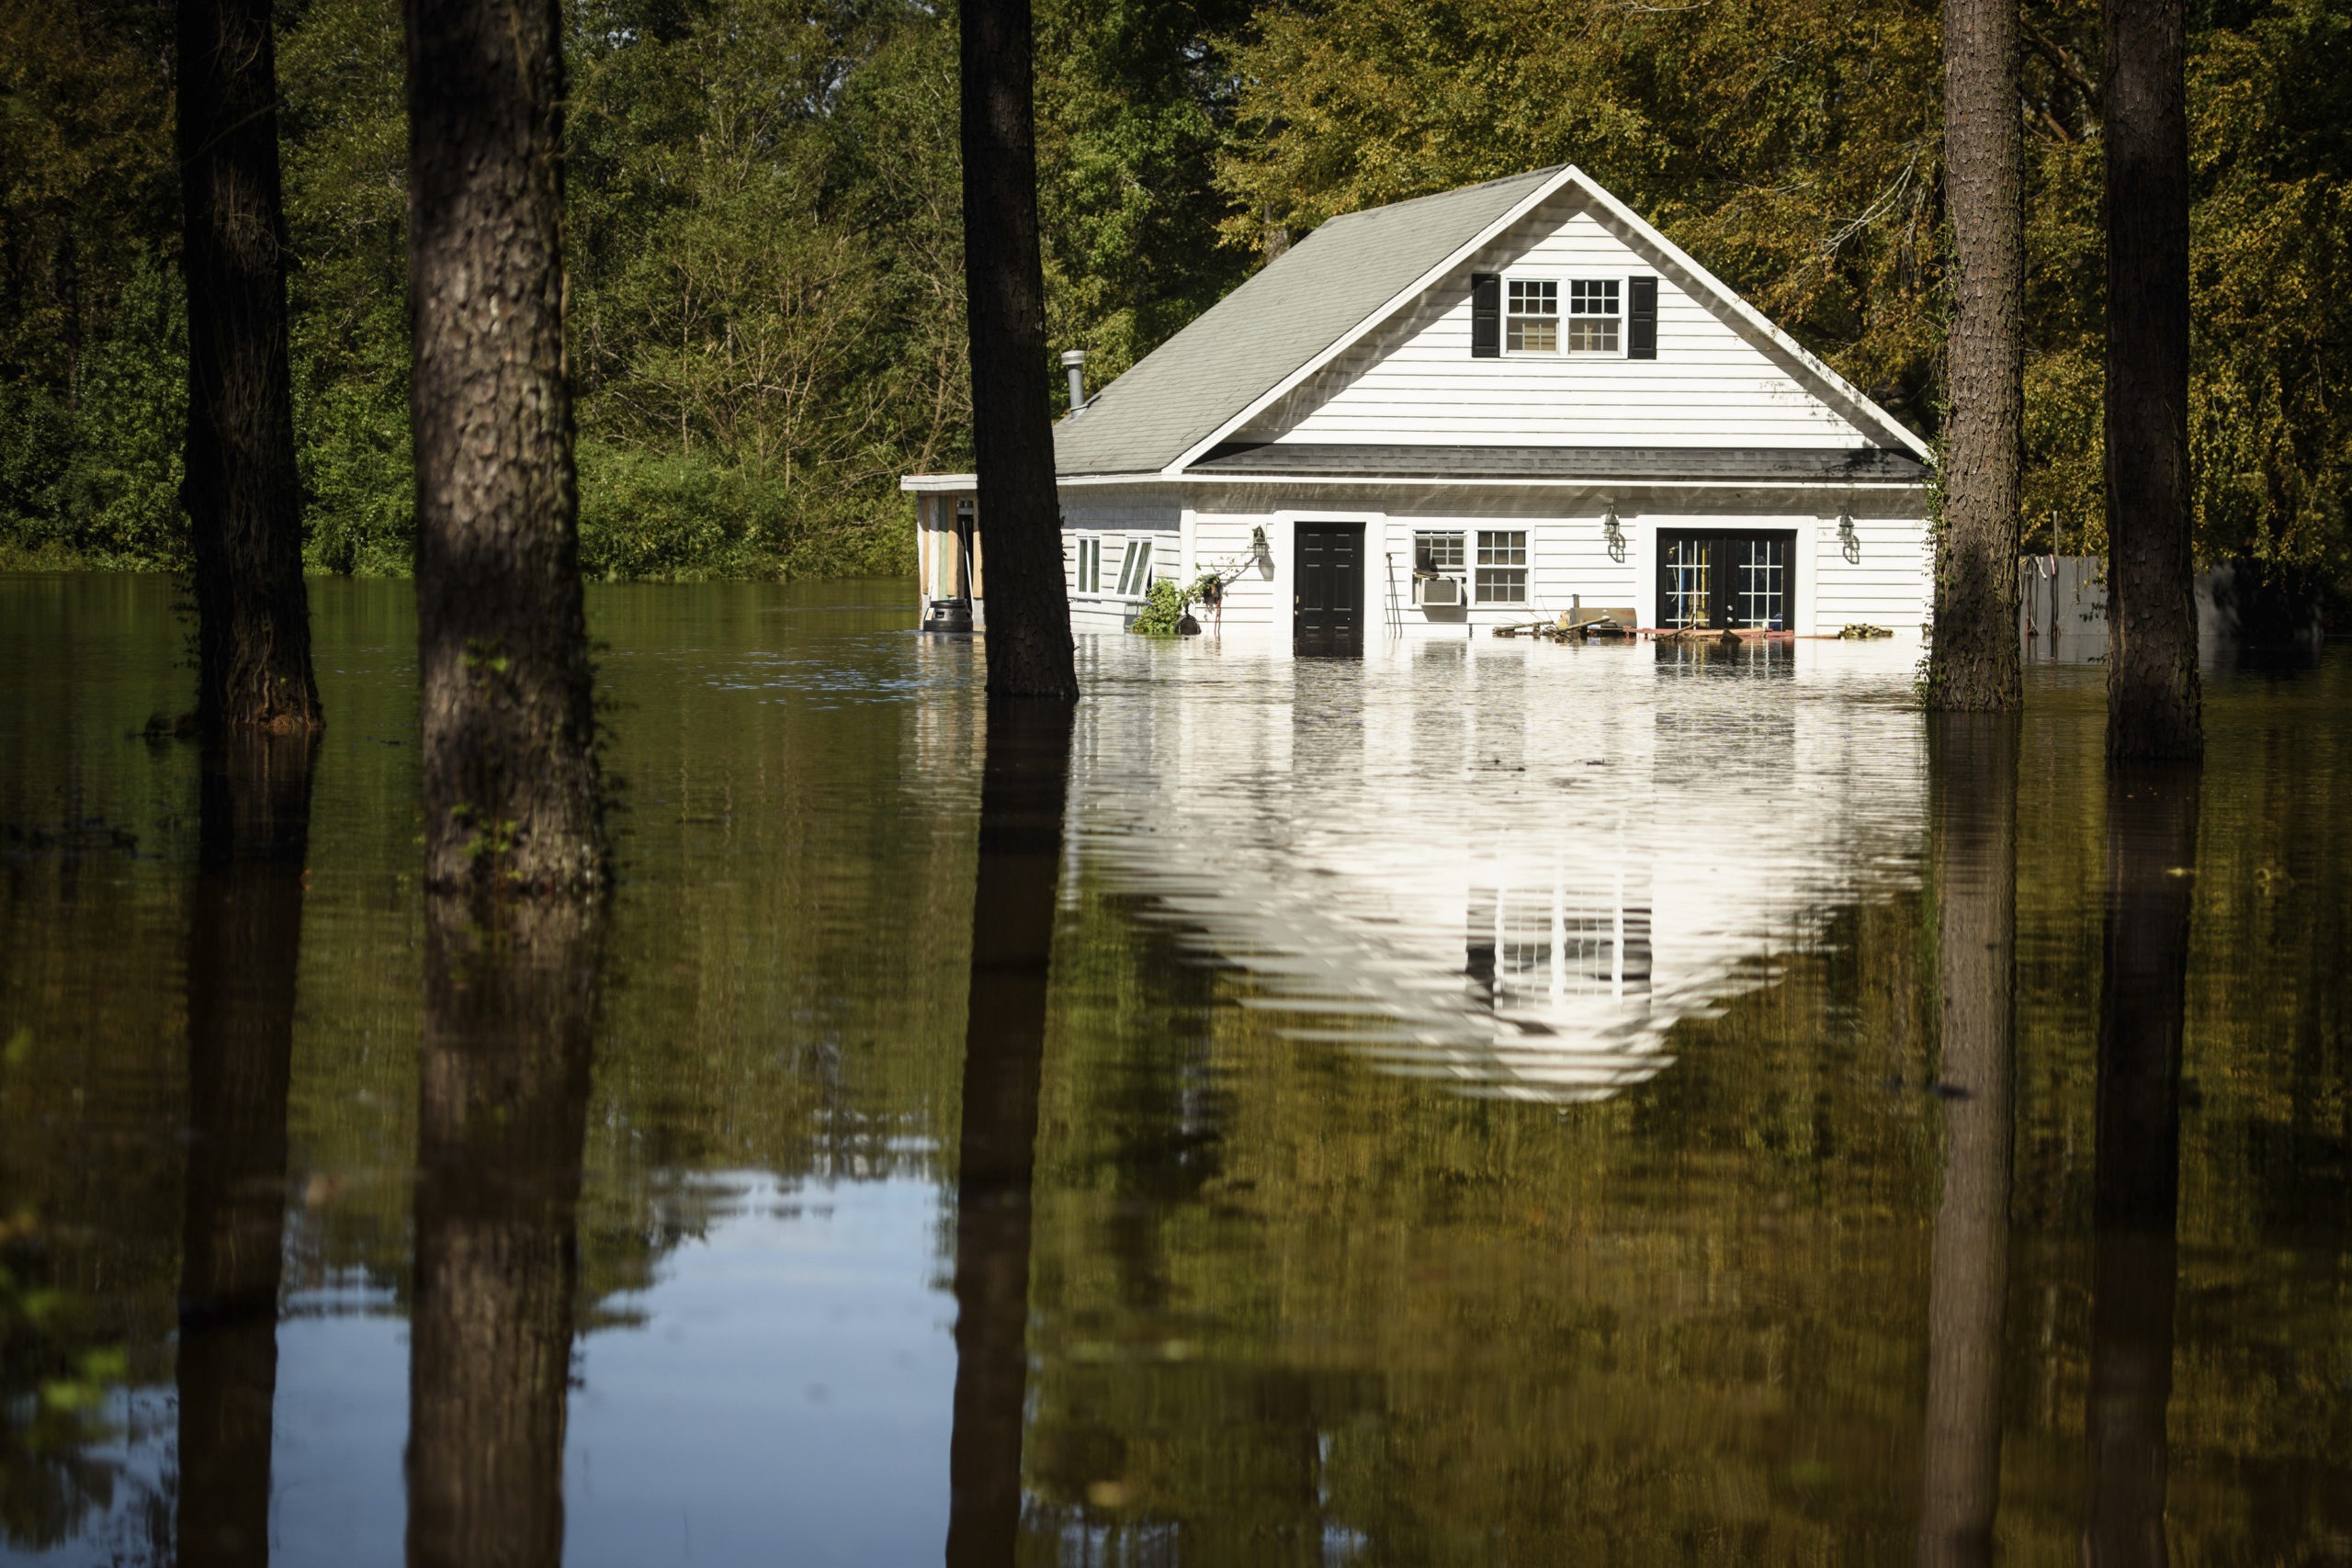 Hot real estate markets have made some homeowners wary of participating in voluntary flood buyout programs